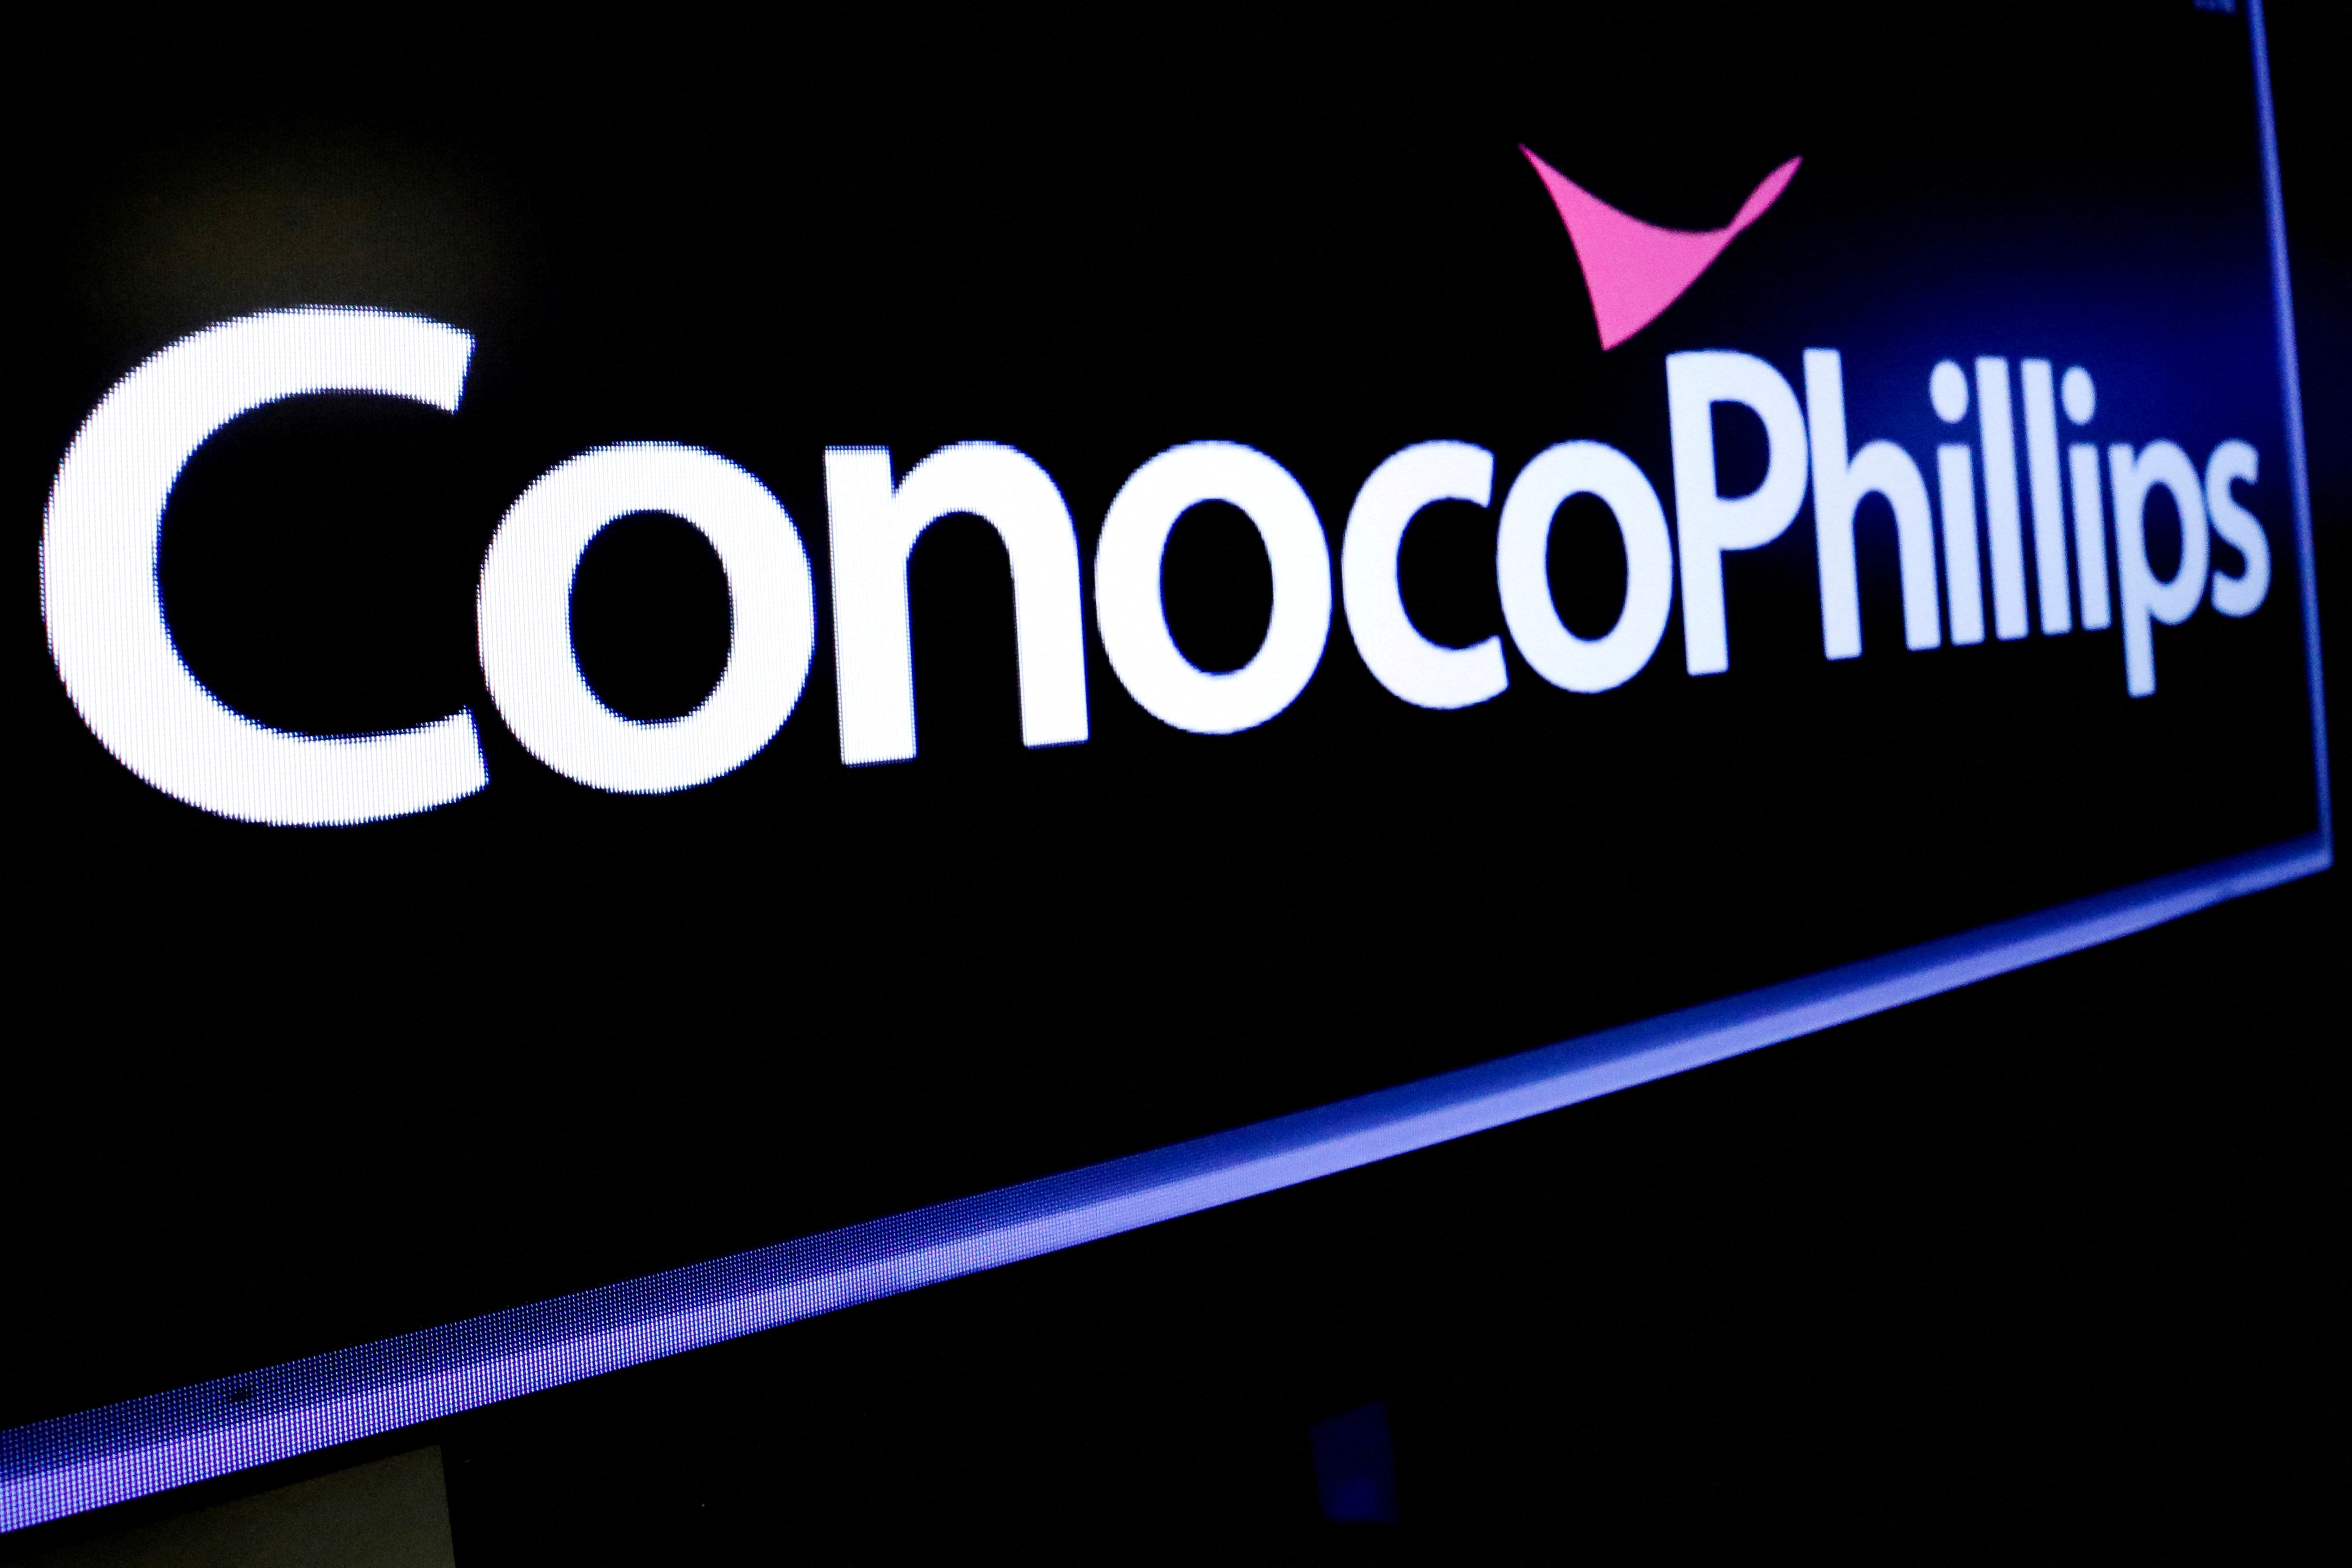 The logo for ConocoPhillips is displayed on a screen on the floor at the NYSE in New York